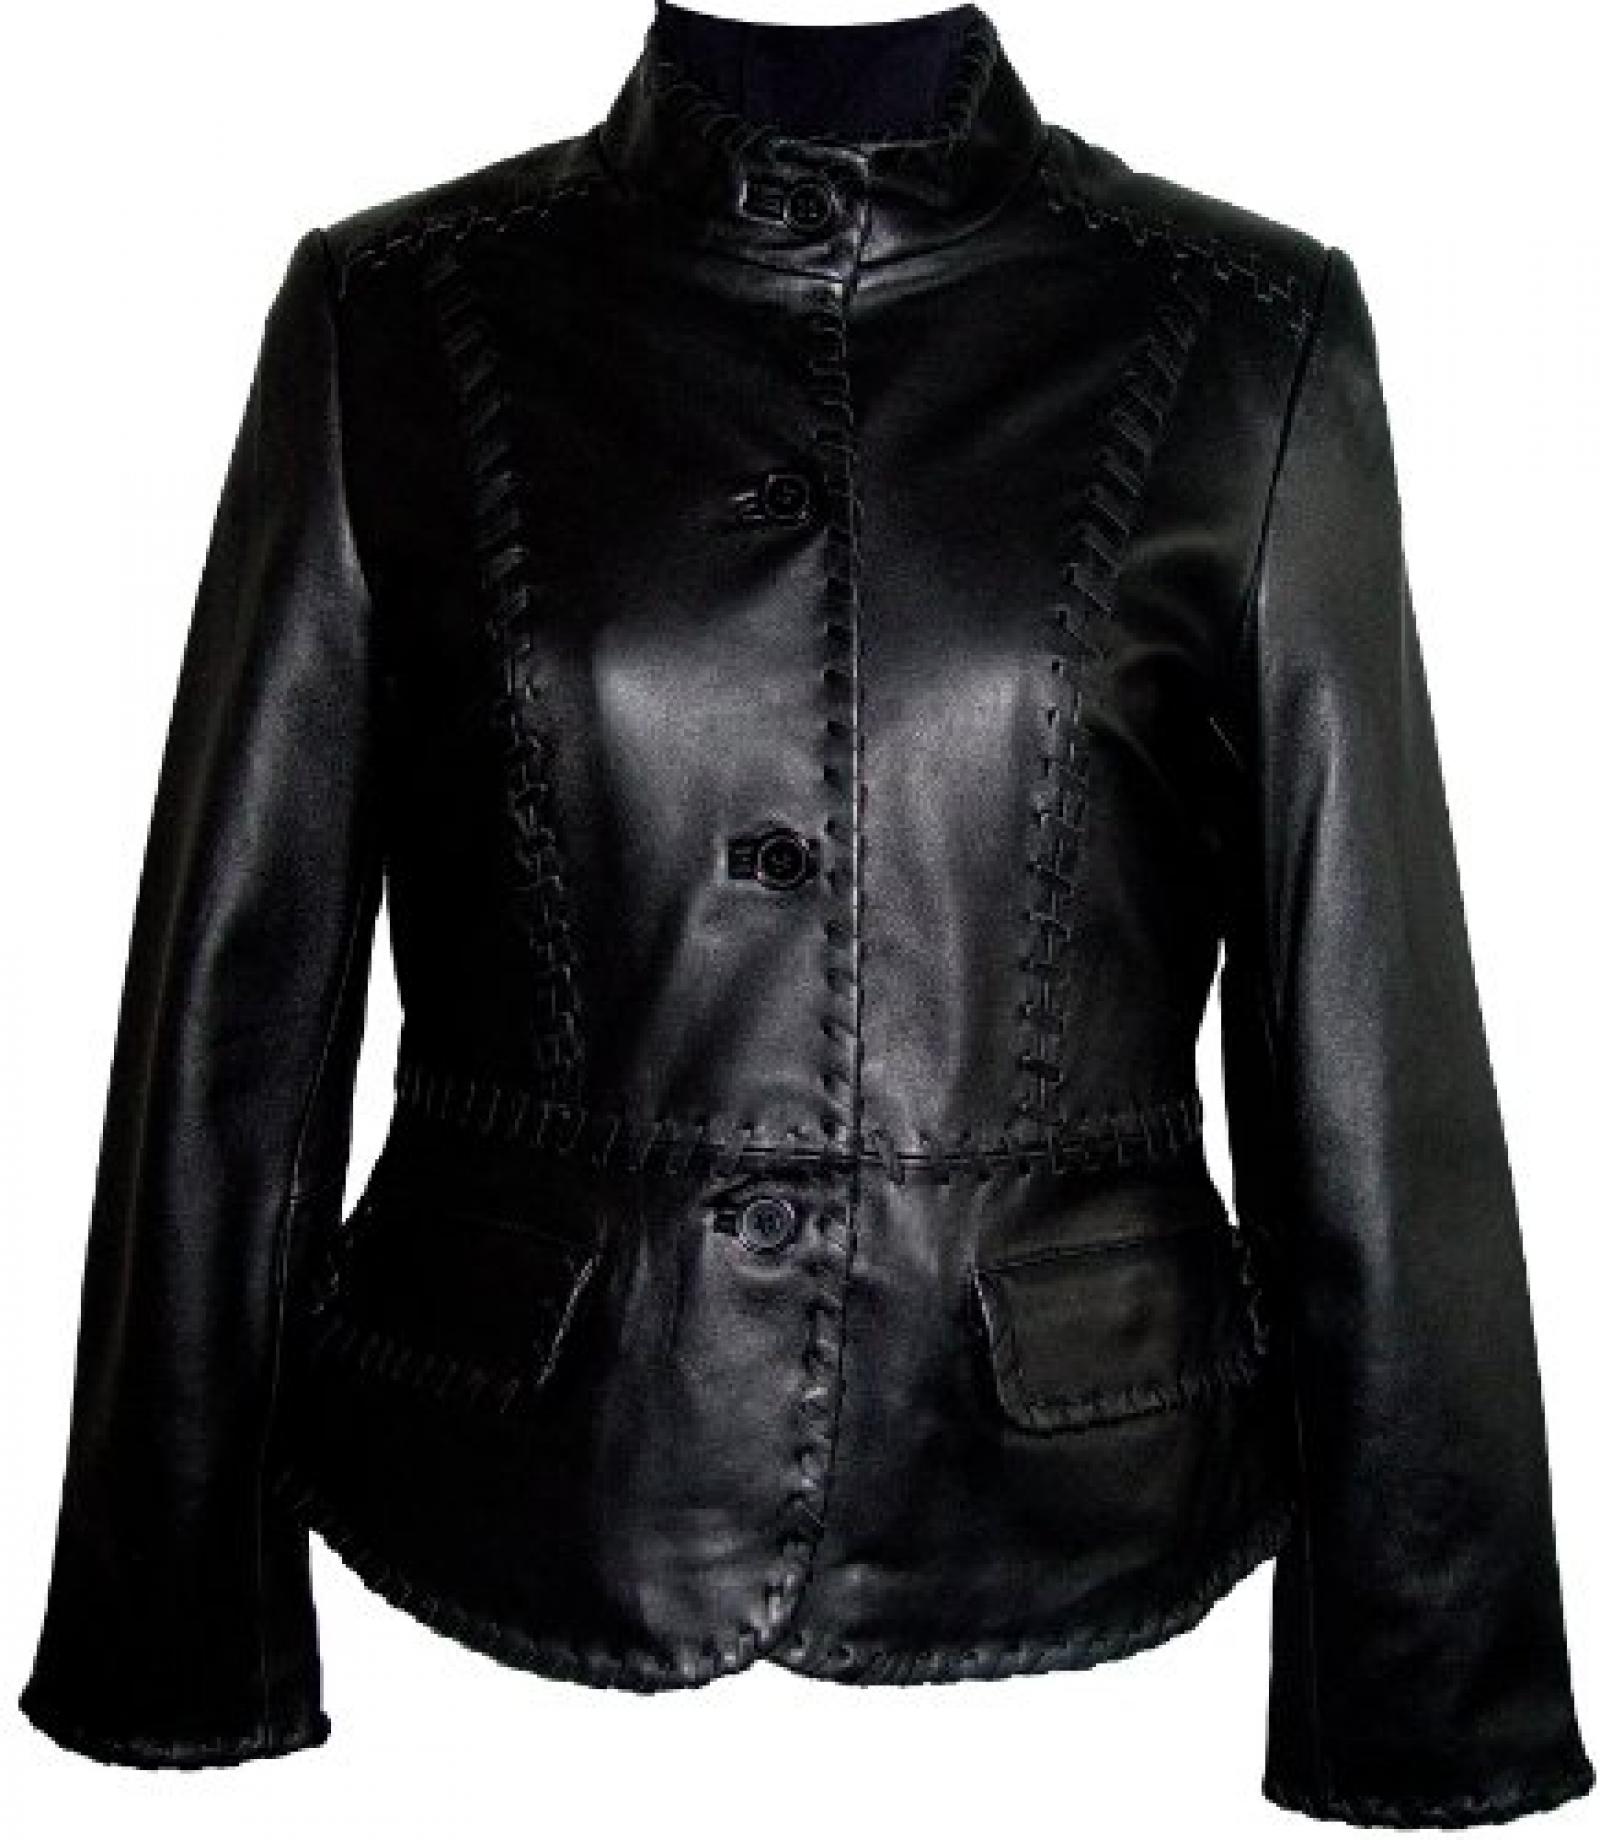 Paccilo FREE tailoring Womens 4025 Plus Size Short Leather Jacket 